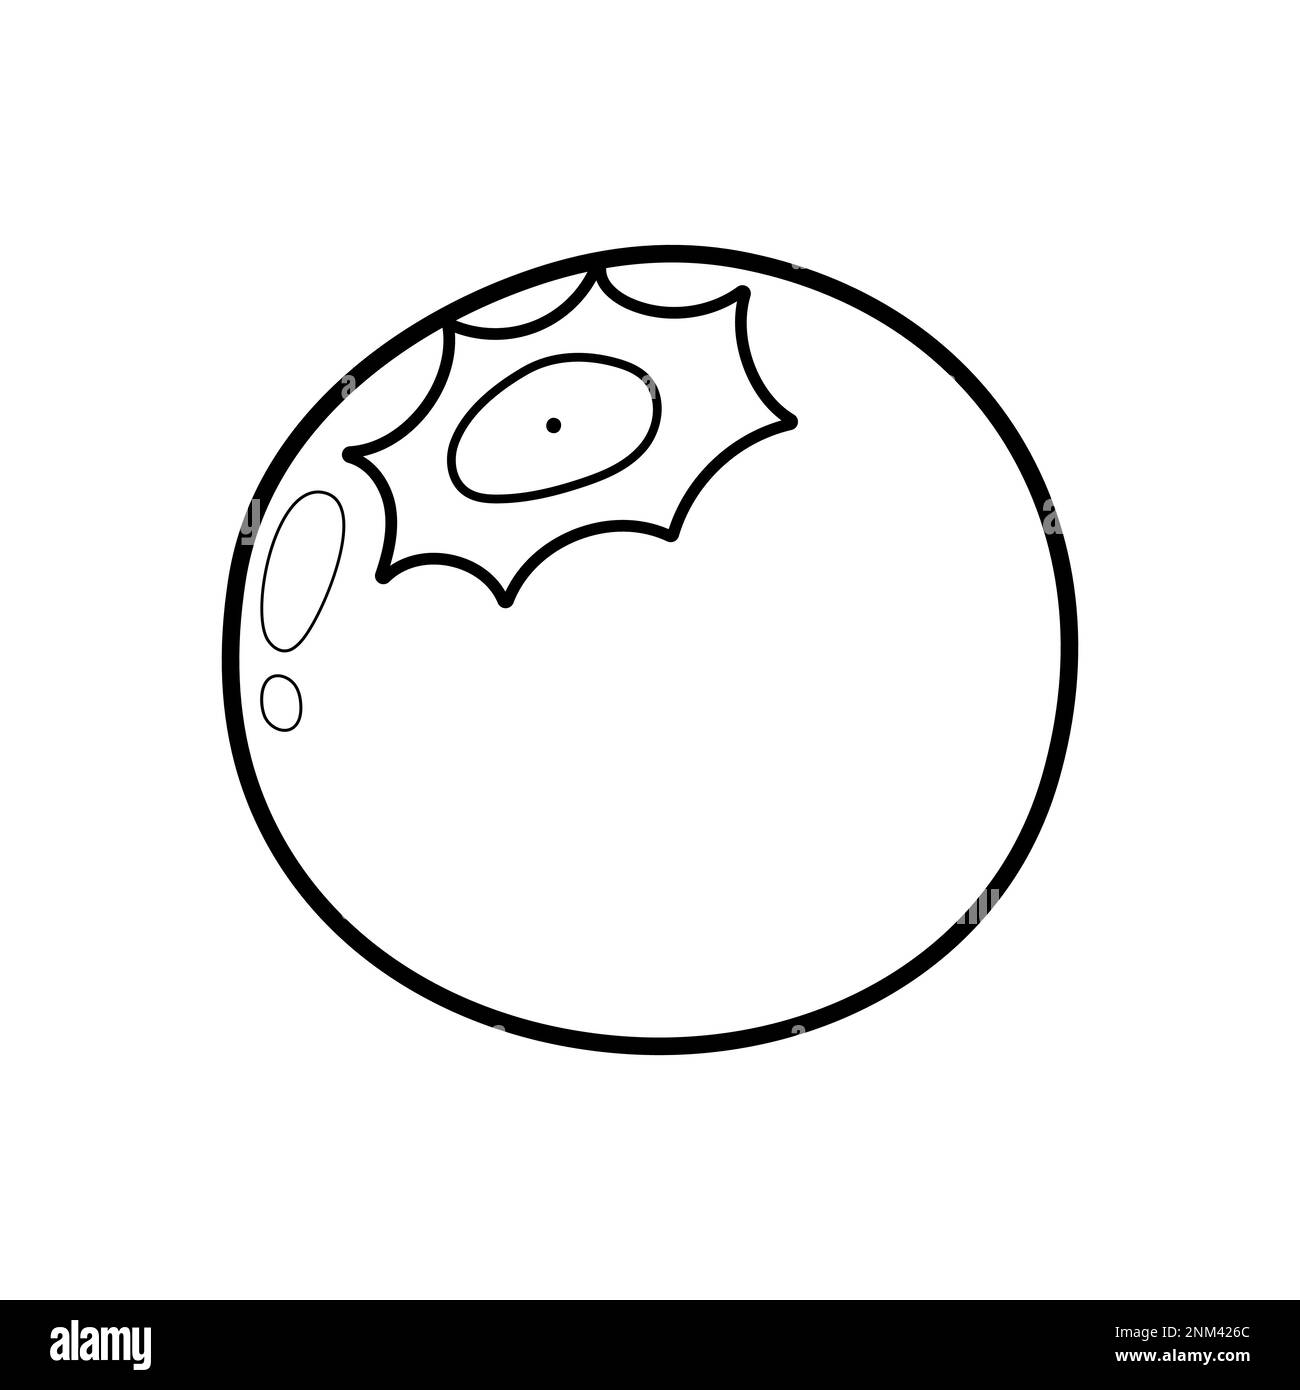 Blueberry coloring page for adults and kids. Black and white print with berry Stock Vector